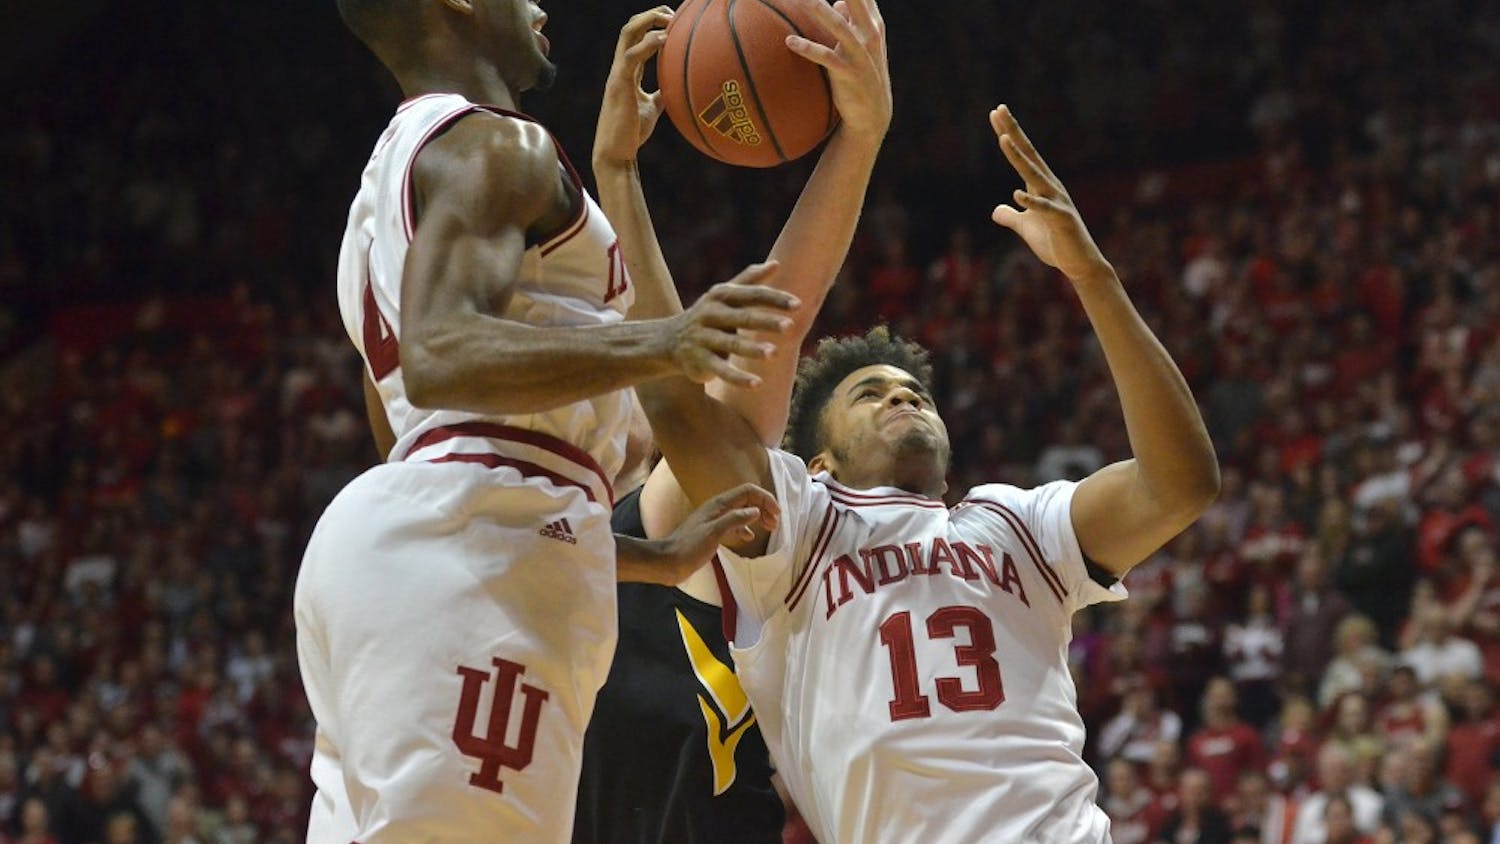 Then-freshman forward Juwan Morgan and then-sophomore guard Robert Johnson go up for a rebound against then-No. 4 Iowa in February 2016 at Simon Skjodt Assembly Hall, then known as Assembly Hall. The Hoosiers won 85-78.